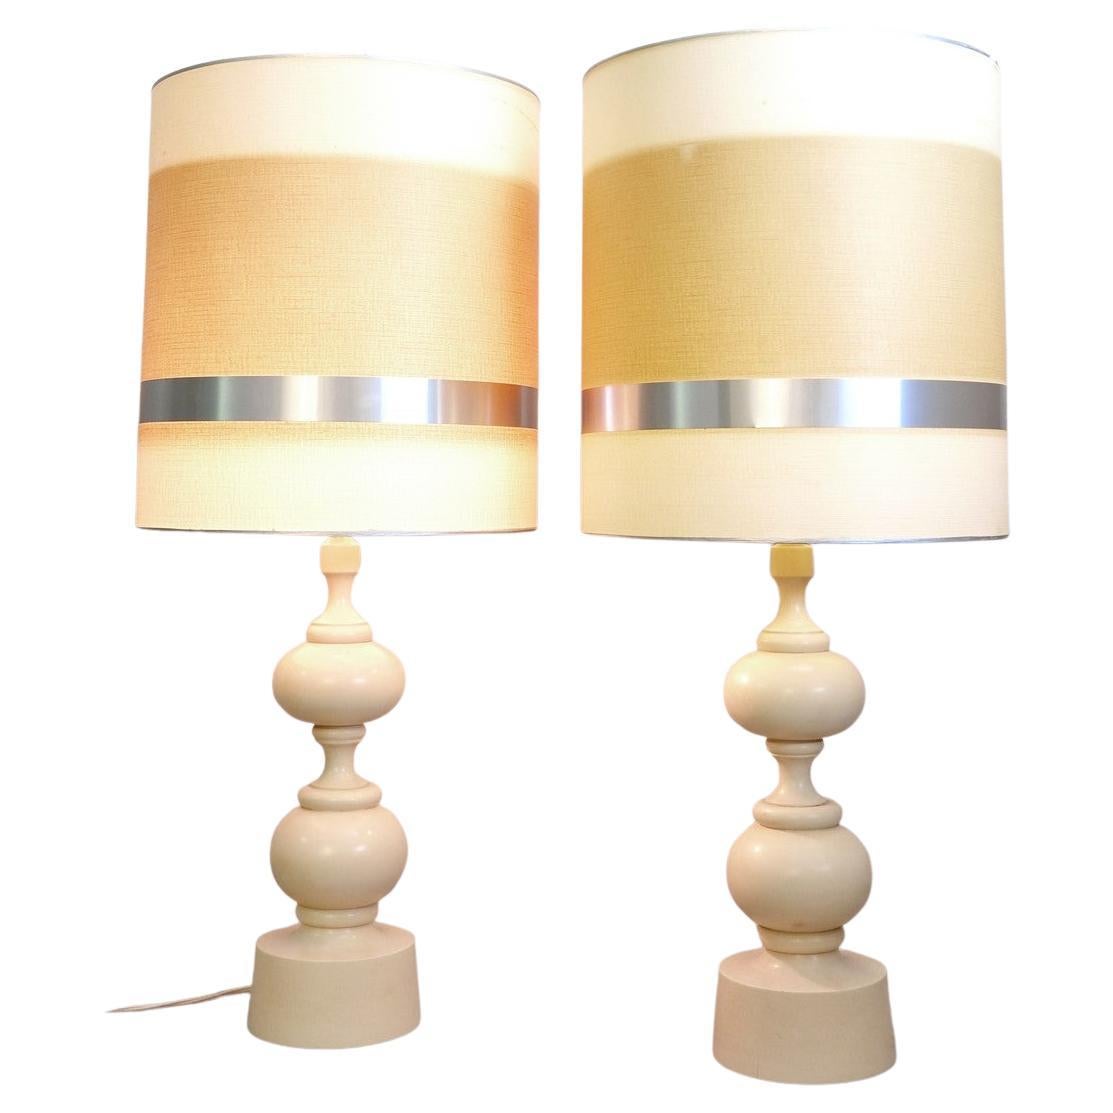 Pair of White Lacquered Turned Wood Lamps